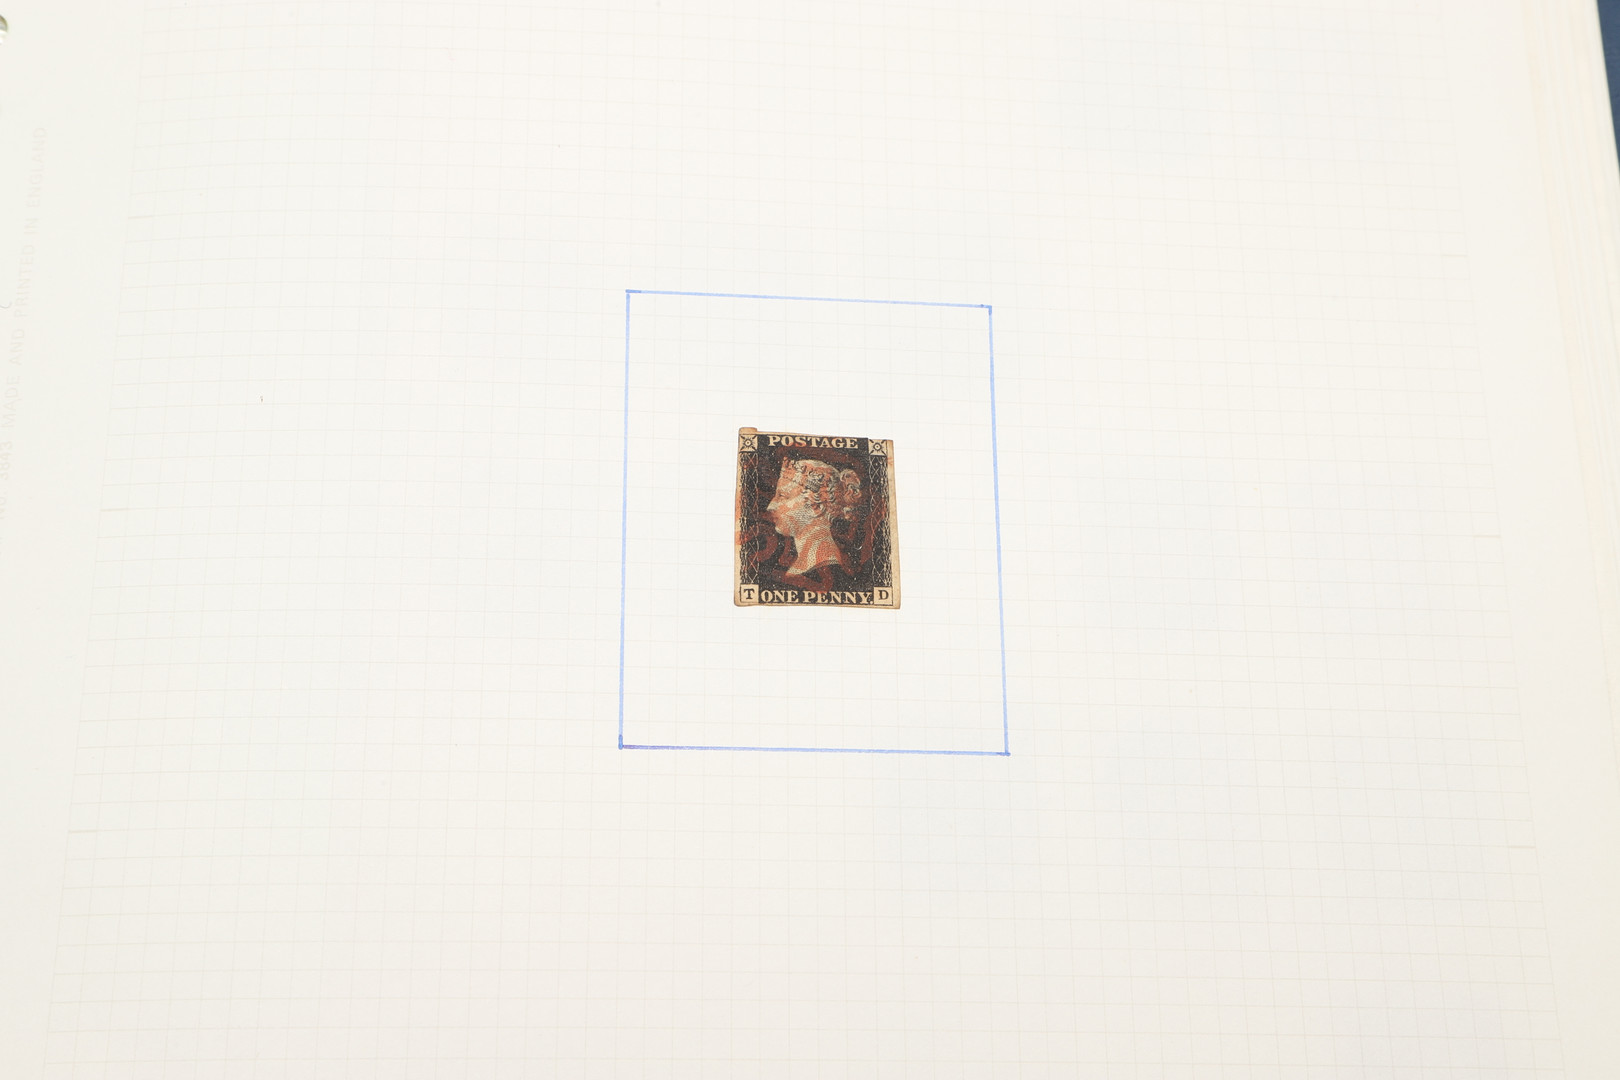 BRITISH & COMMONWEALTH STAMP COLLECTION. - Image 30 of 62